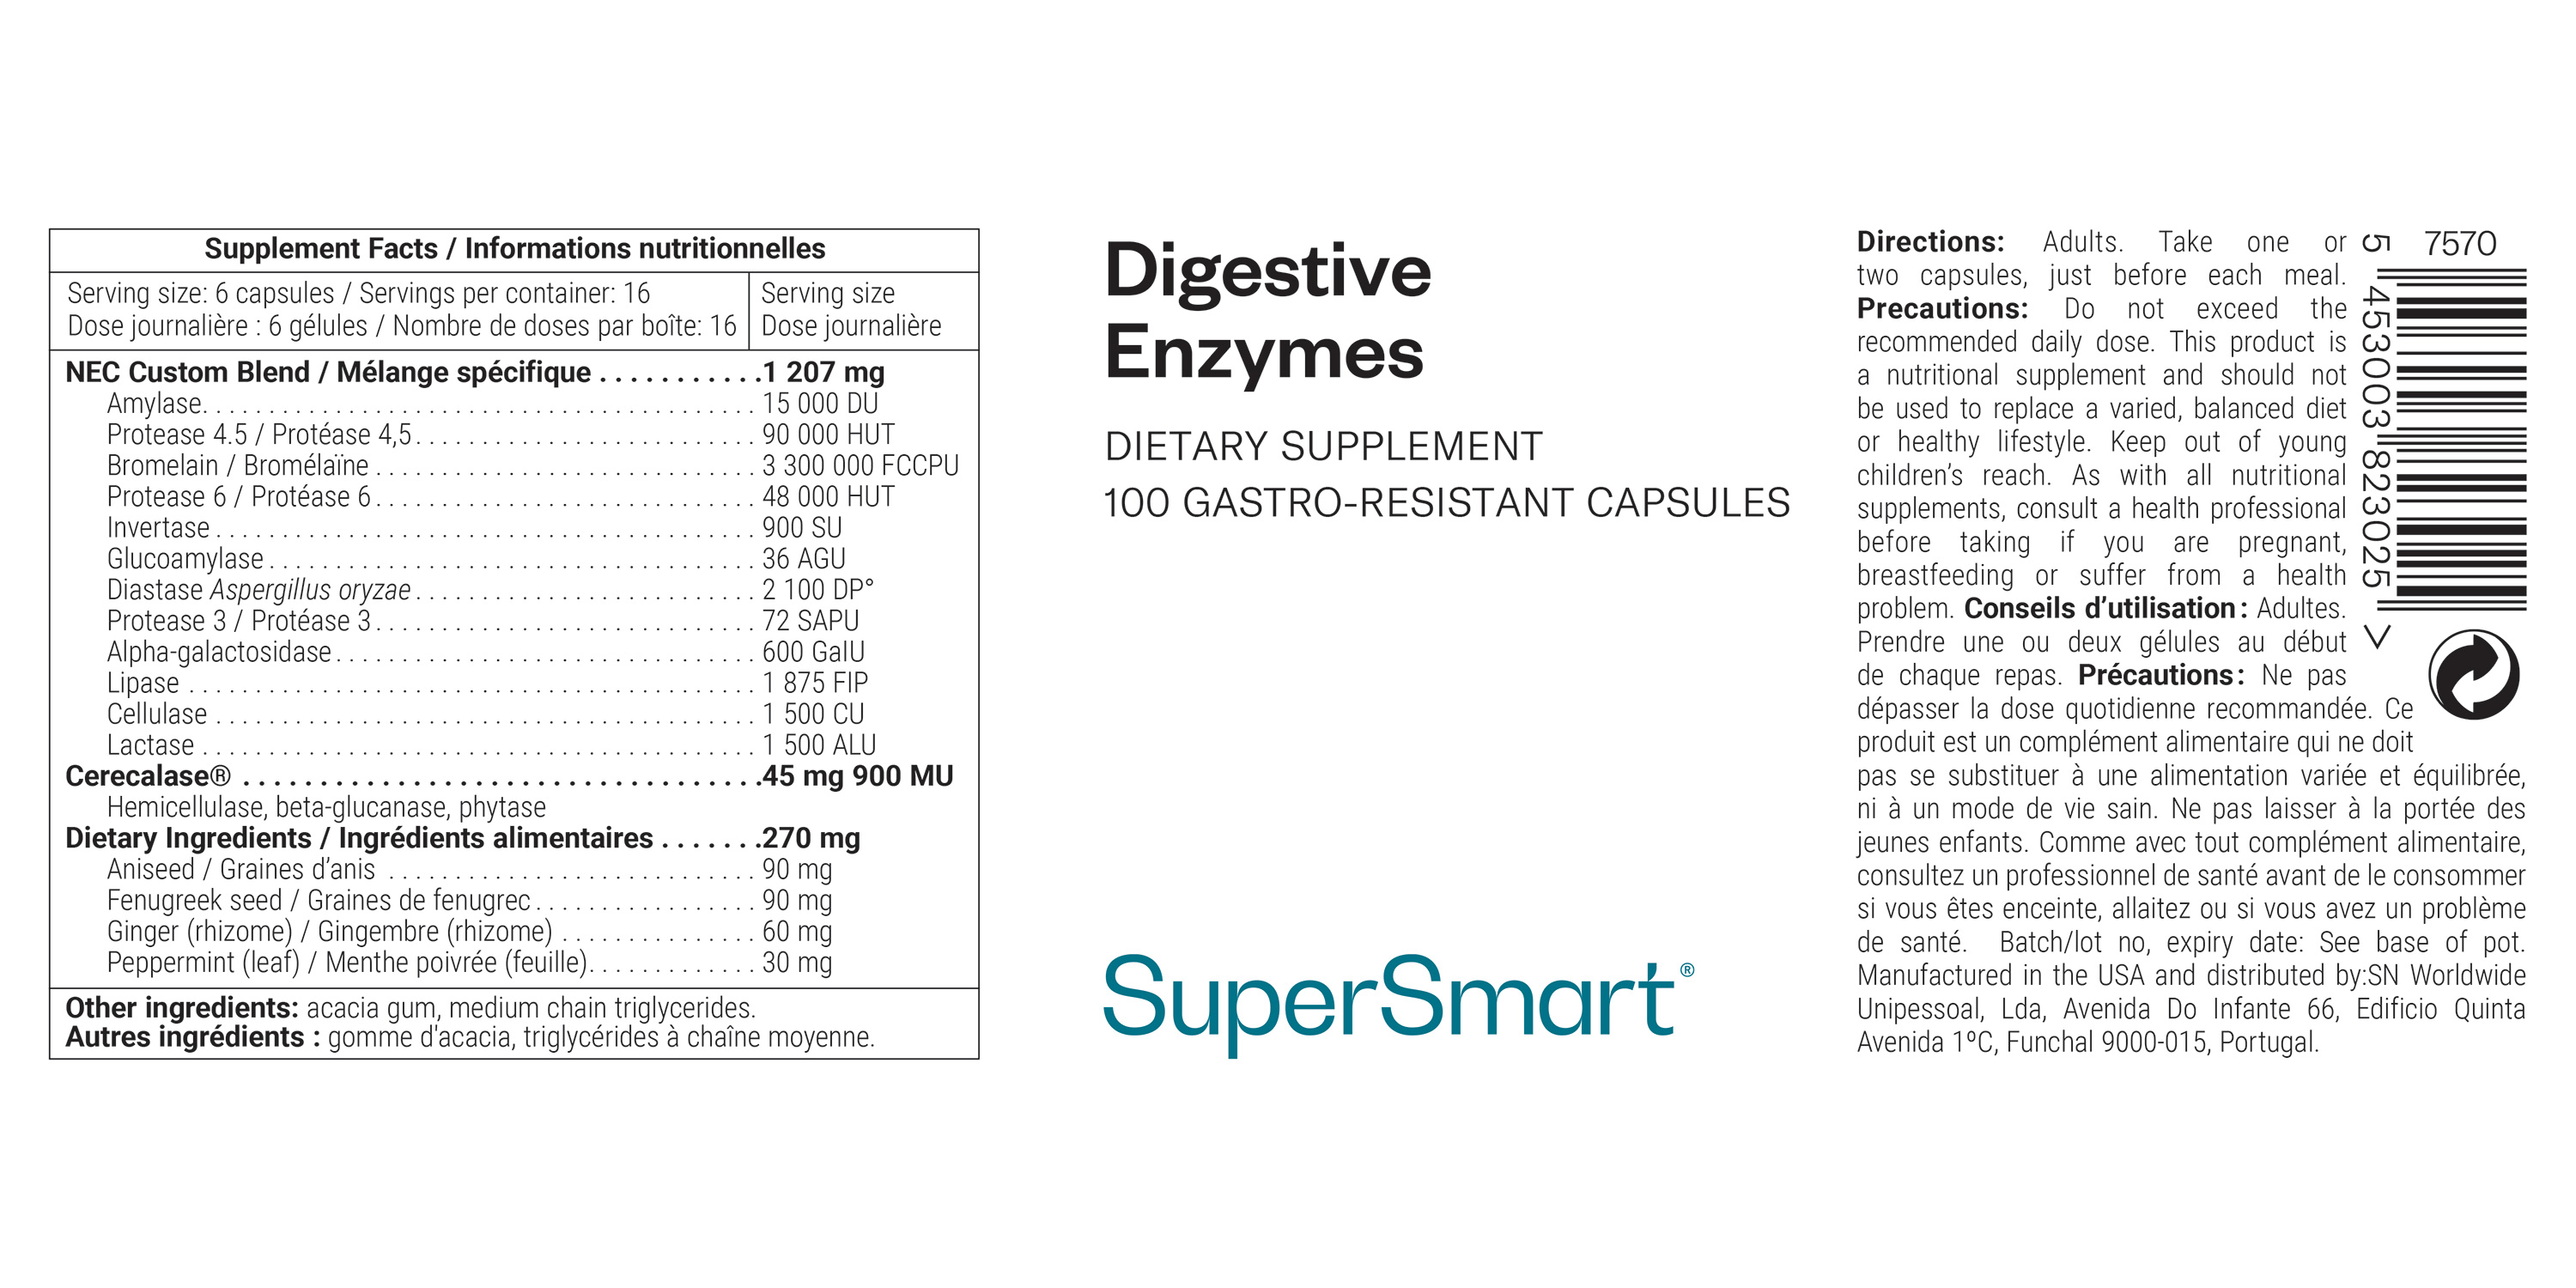 Digestive Enzymes dietary supplement, digestive support